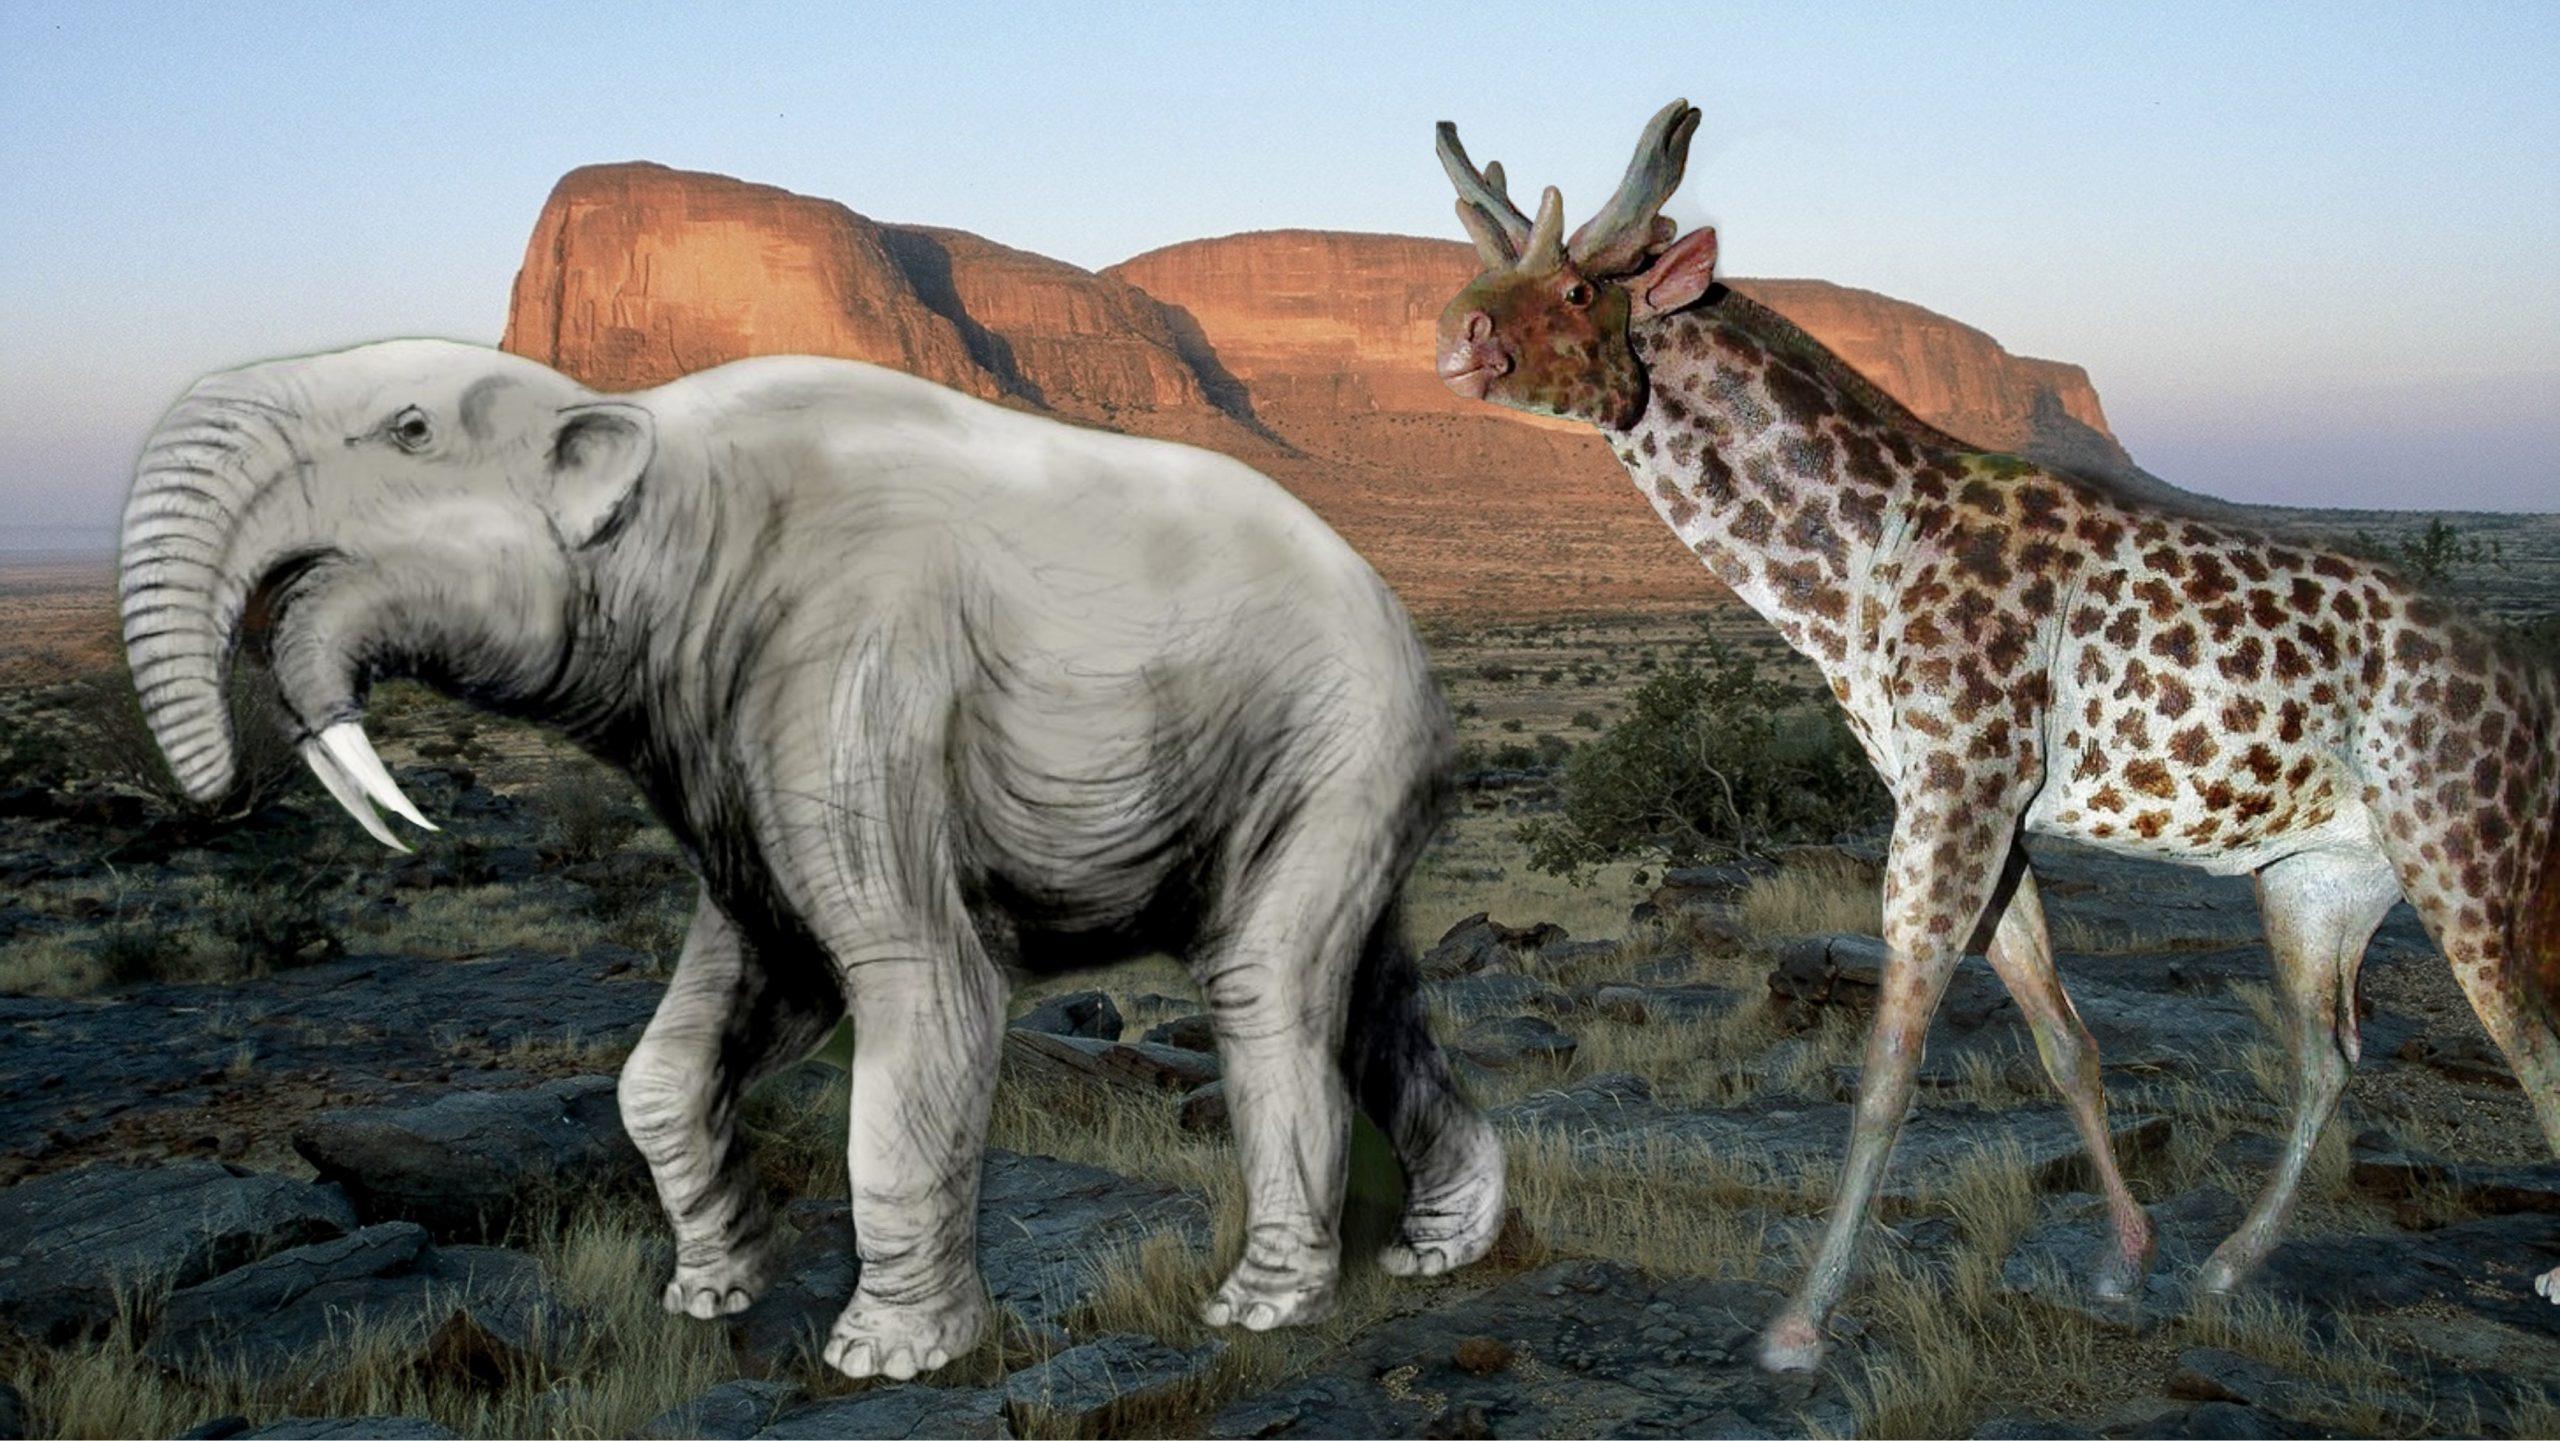 Dying out of ancient African animals was caused by climate change not humans